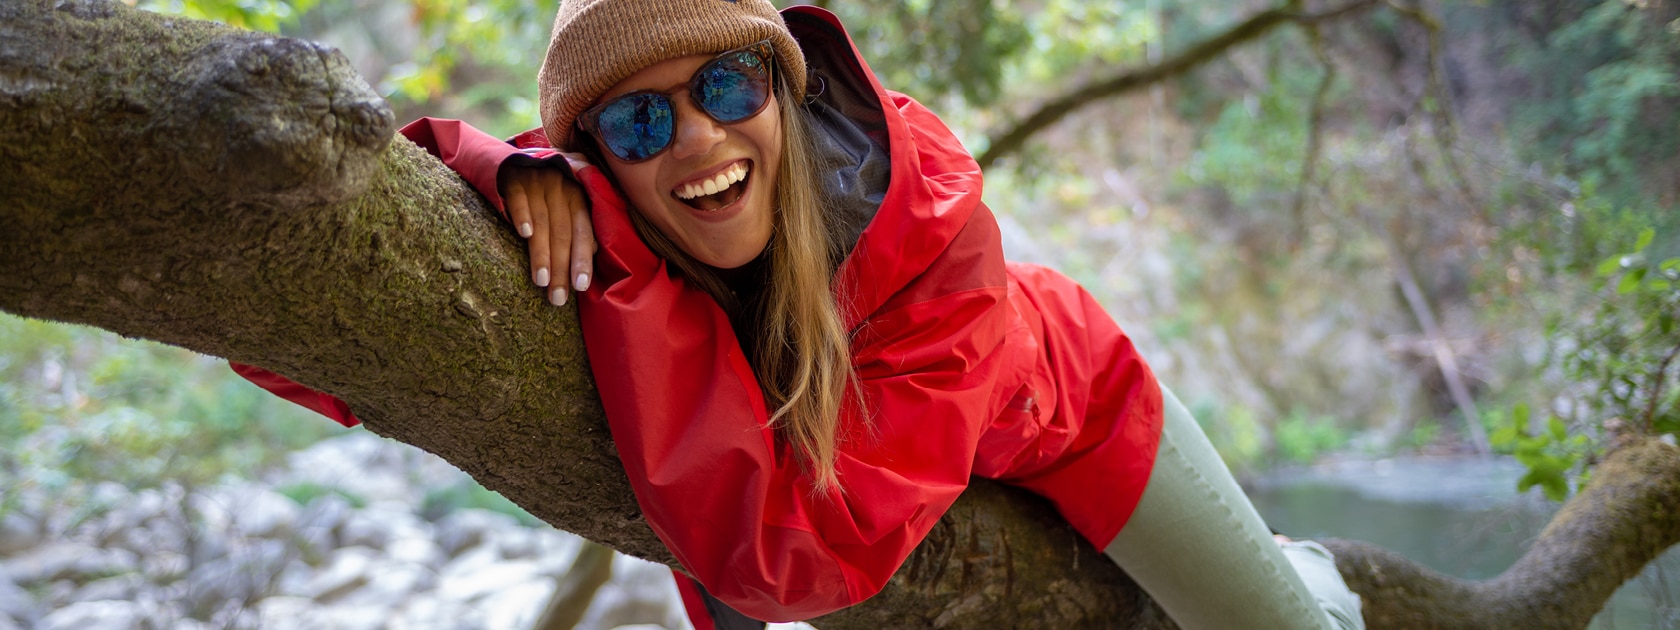 woman in a red jacket and sunglasses lies on a tree branch